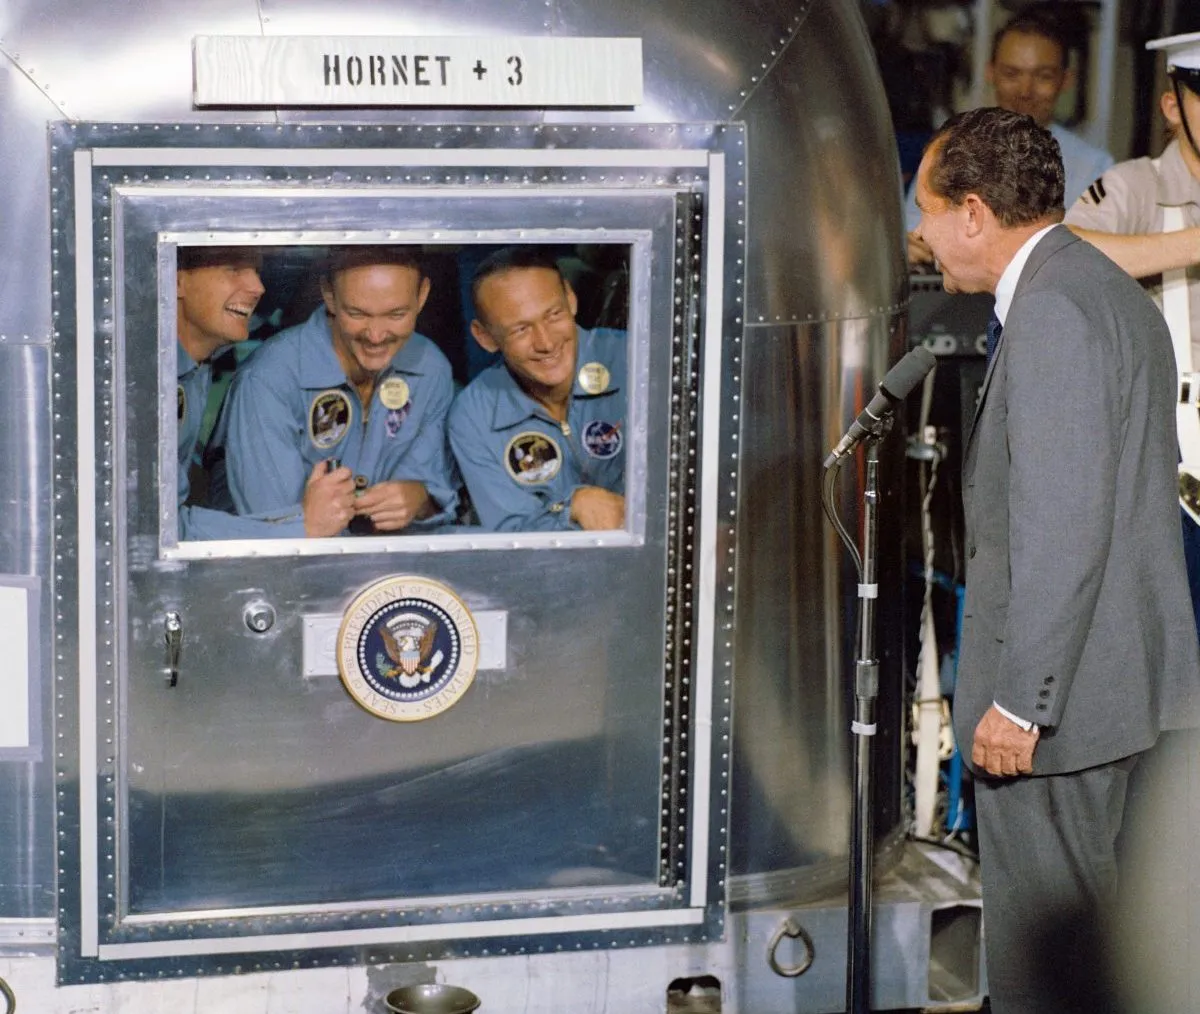 US President Richard Nixon welcomes the Apollo 11 astronauts back to Earth, aboard the USS Hornet. Here, Neil Armstrong, Michael Collins and Buzz Aldrin greet the President from the confines of their quarantine facility. Credit: NASA